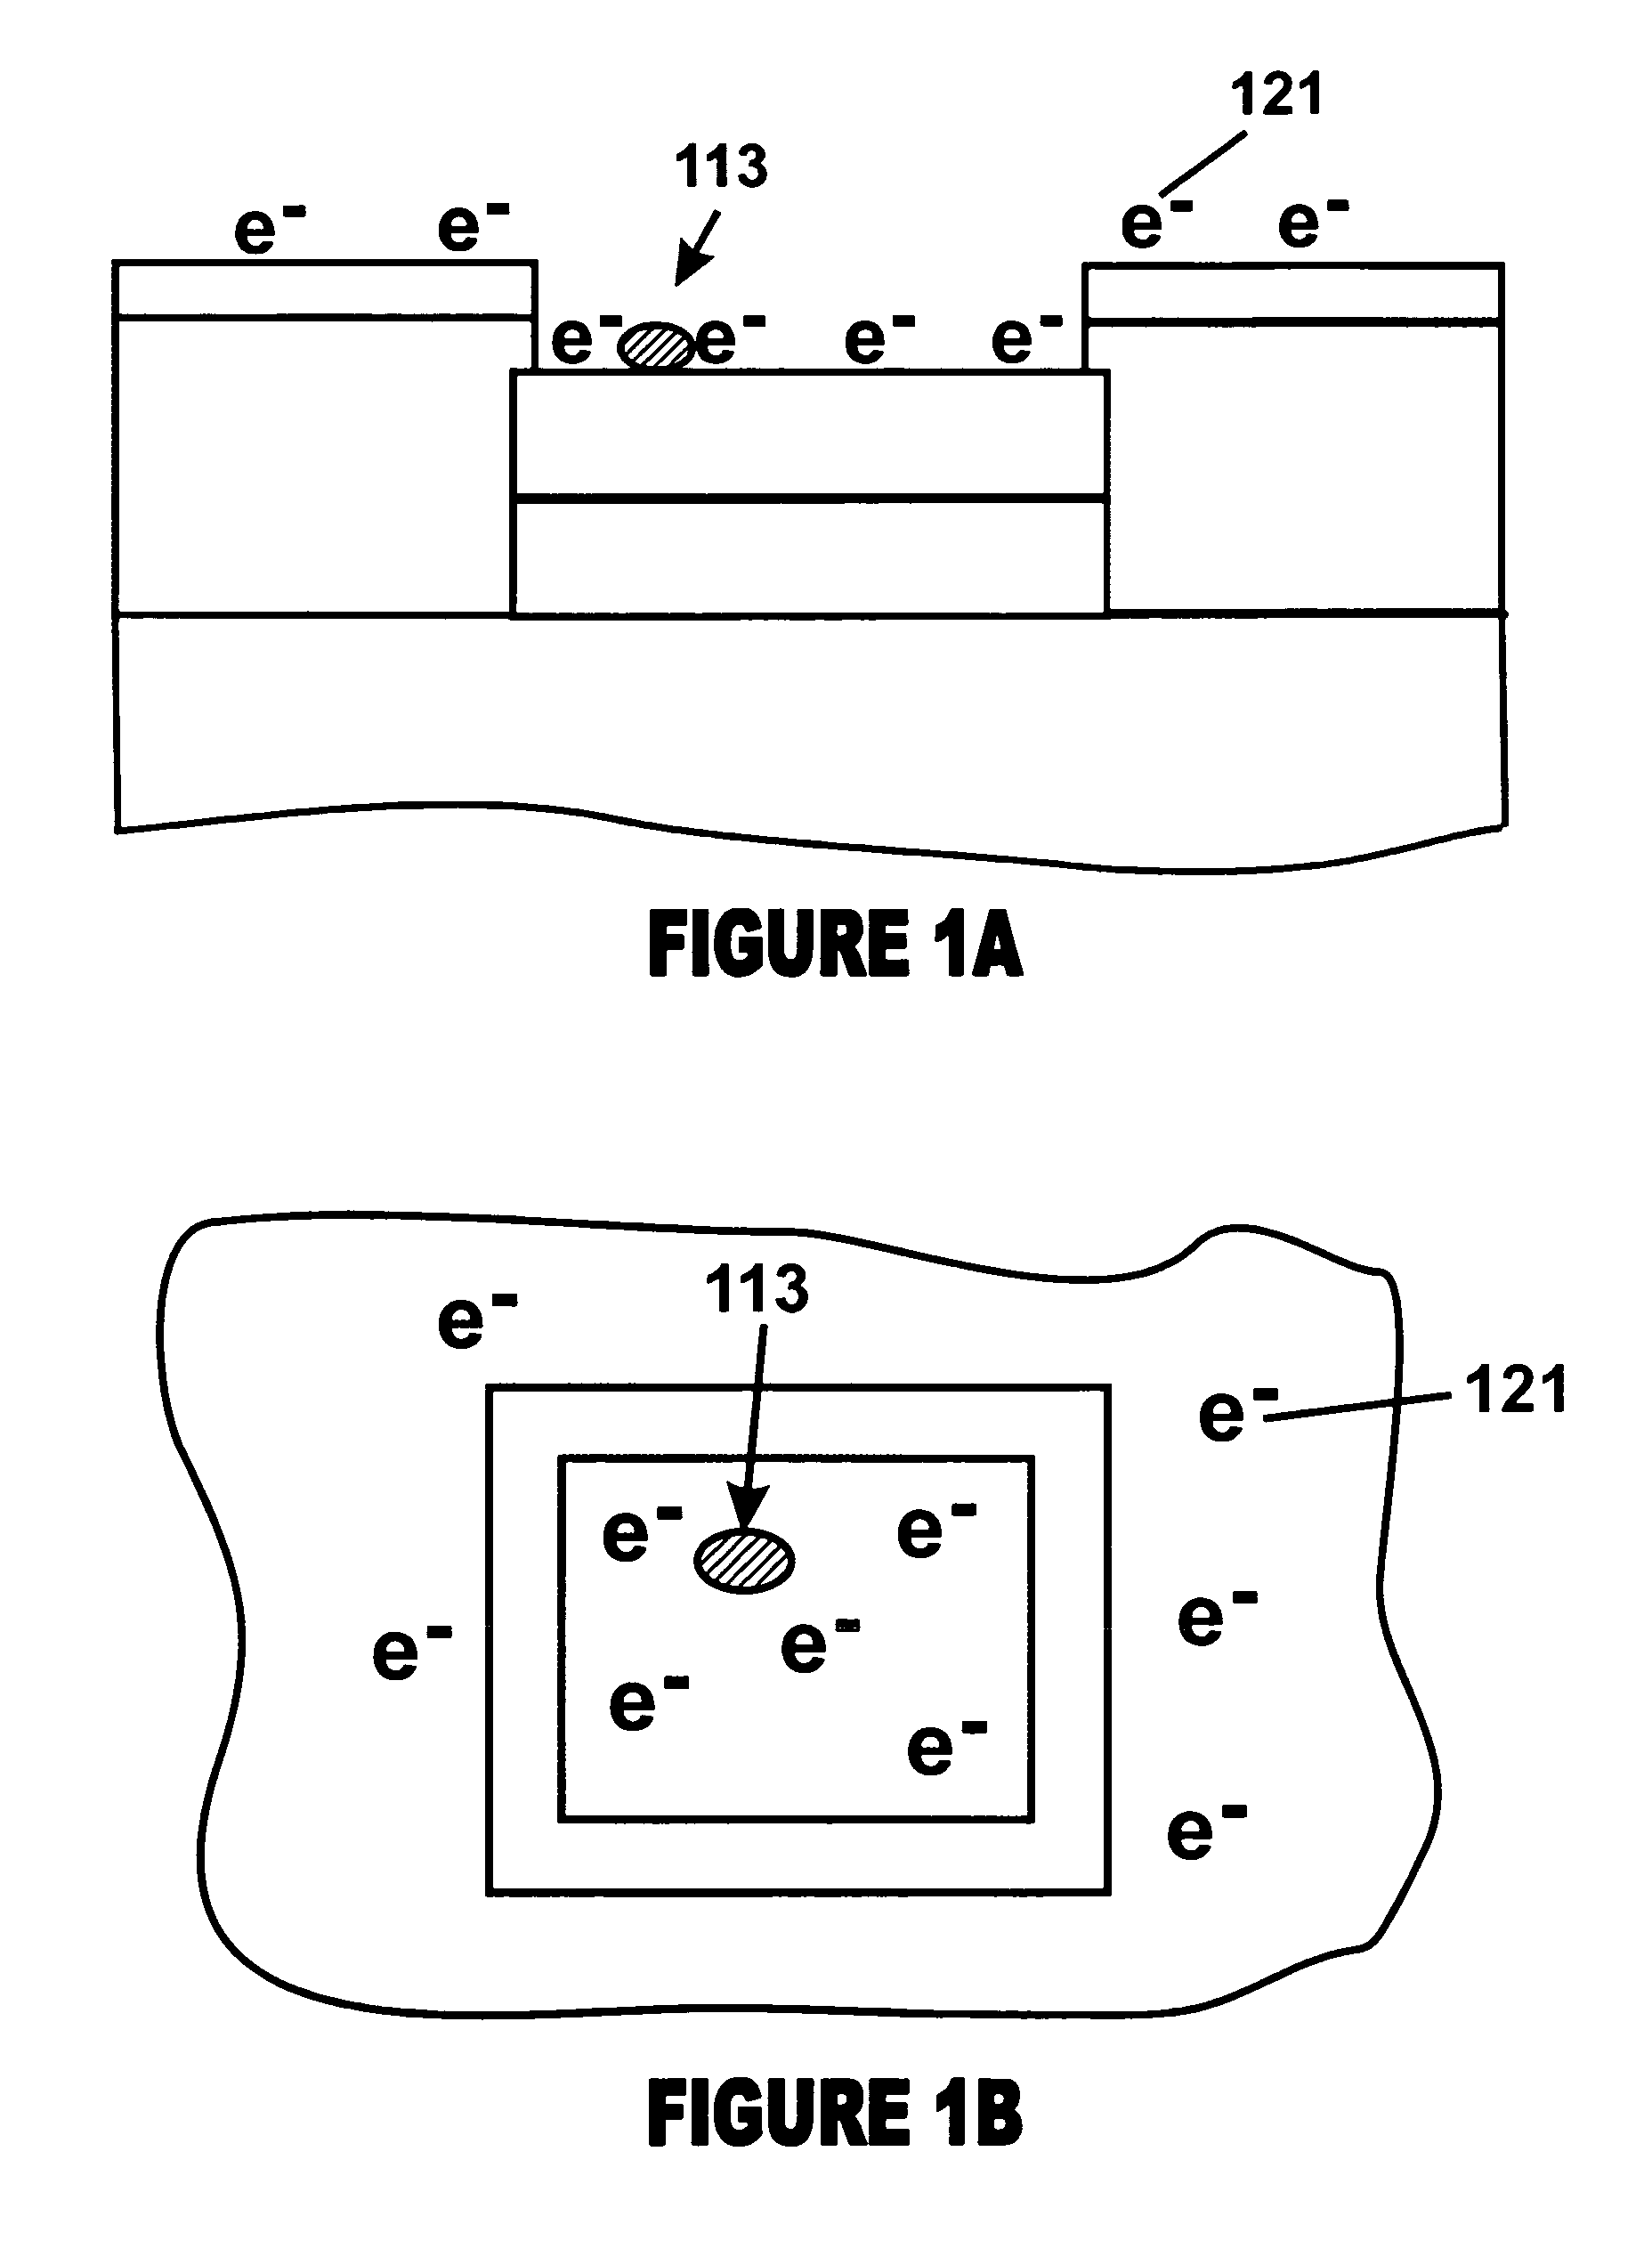 Method for treatment of samples for auger electronic spectrometer (AES) in the manufacture of integrated circuits